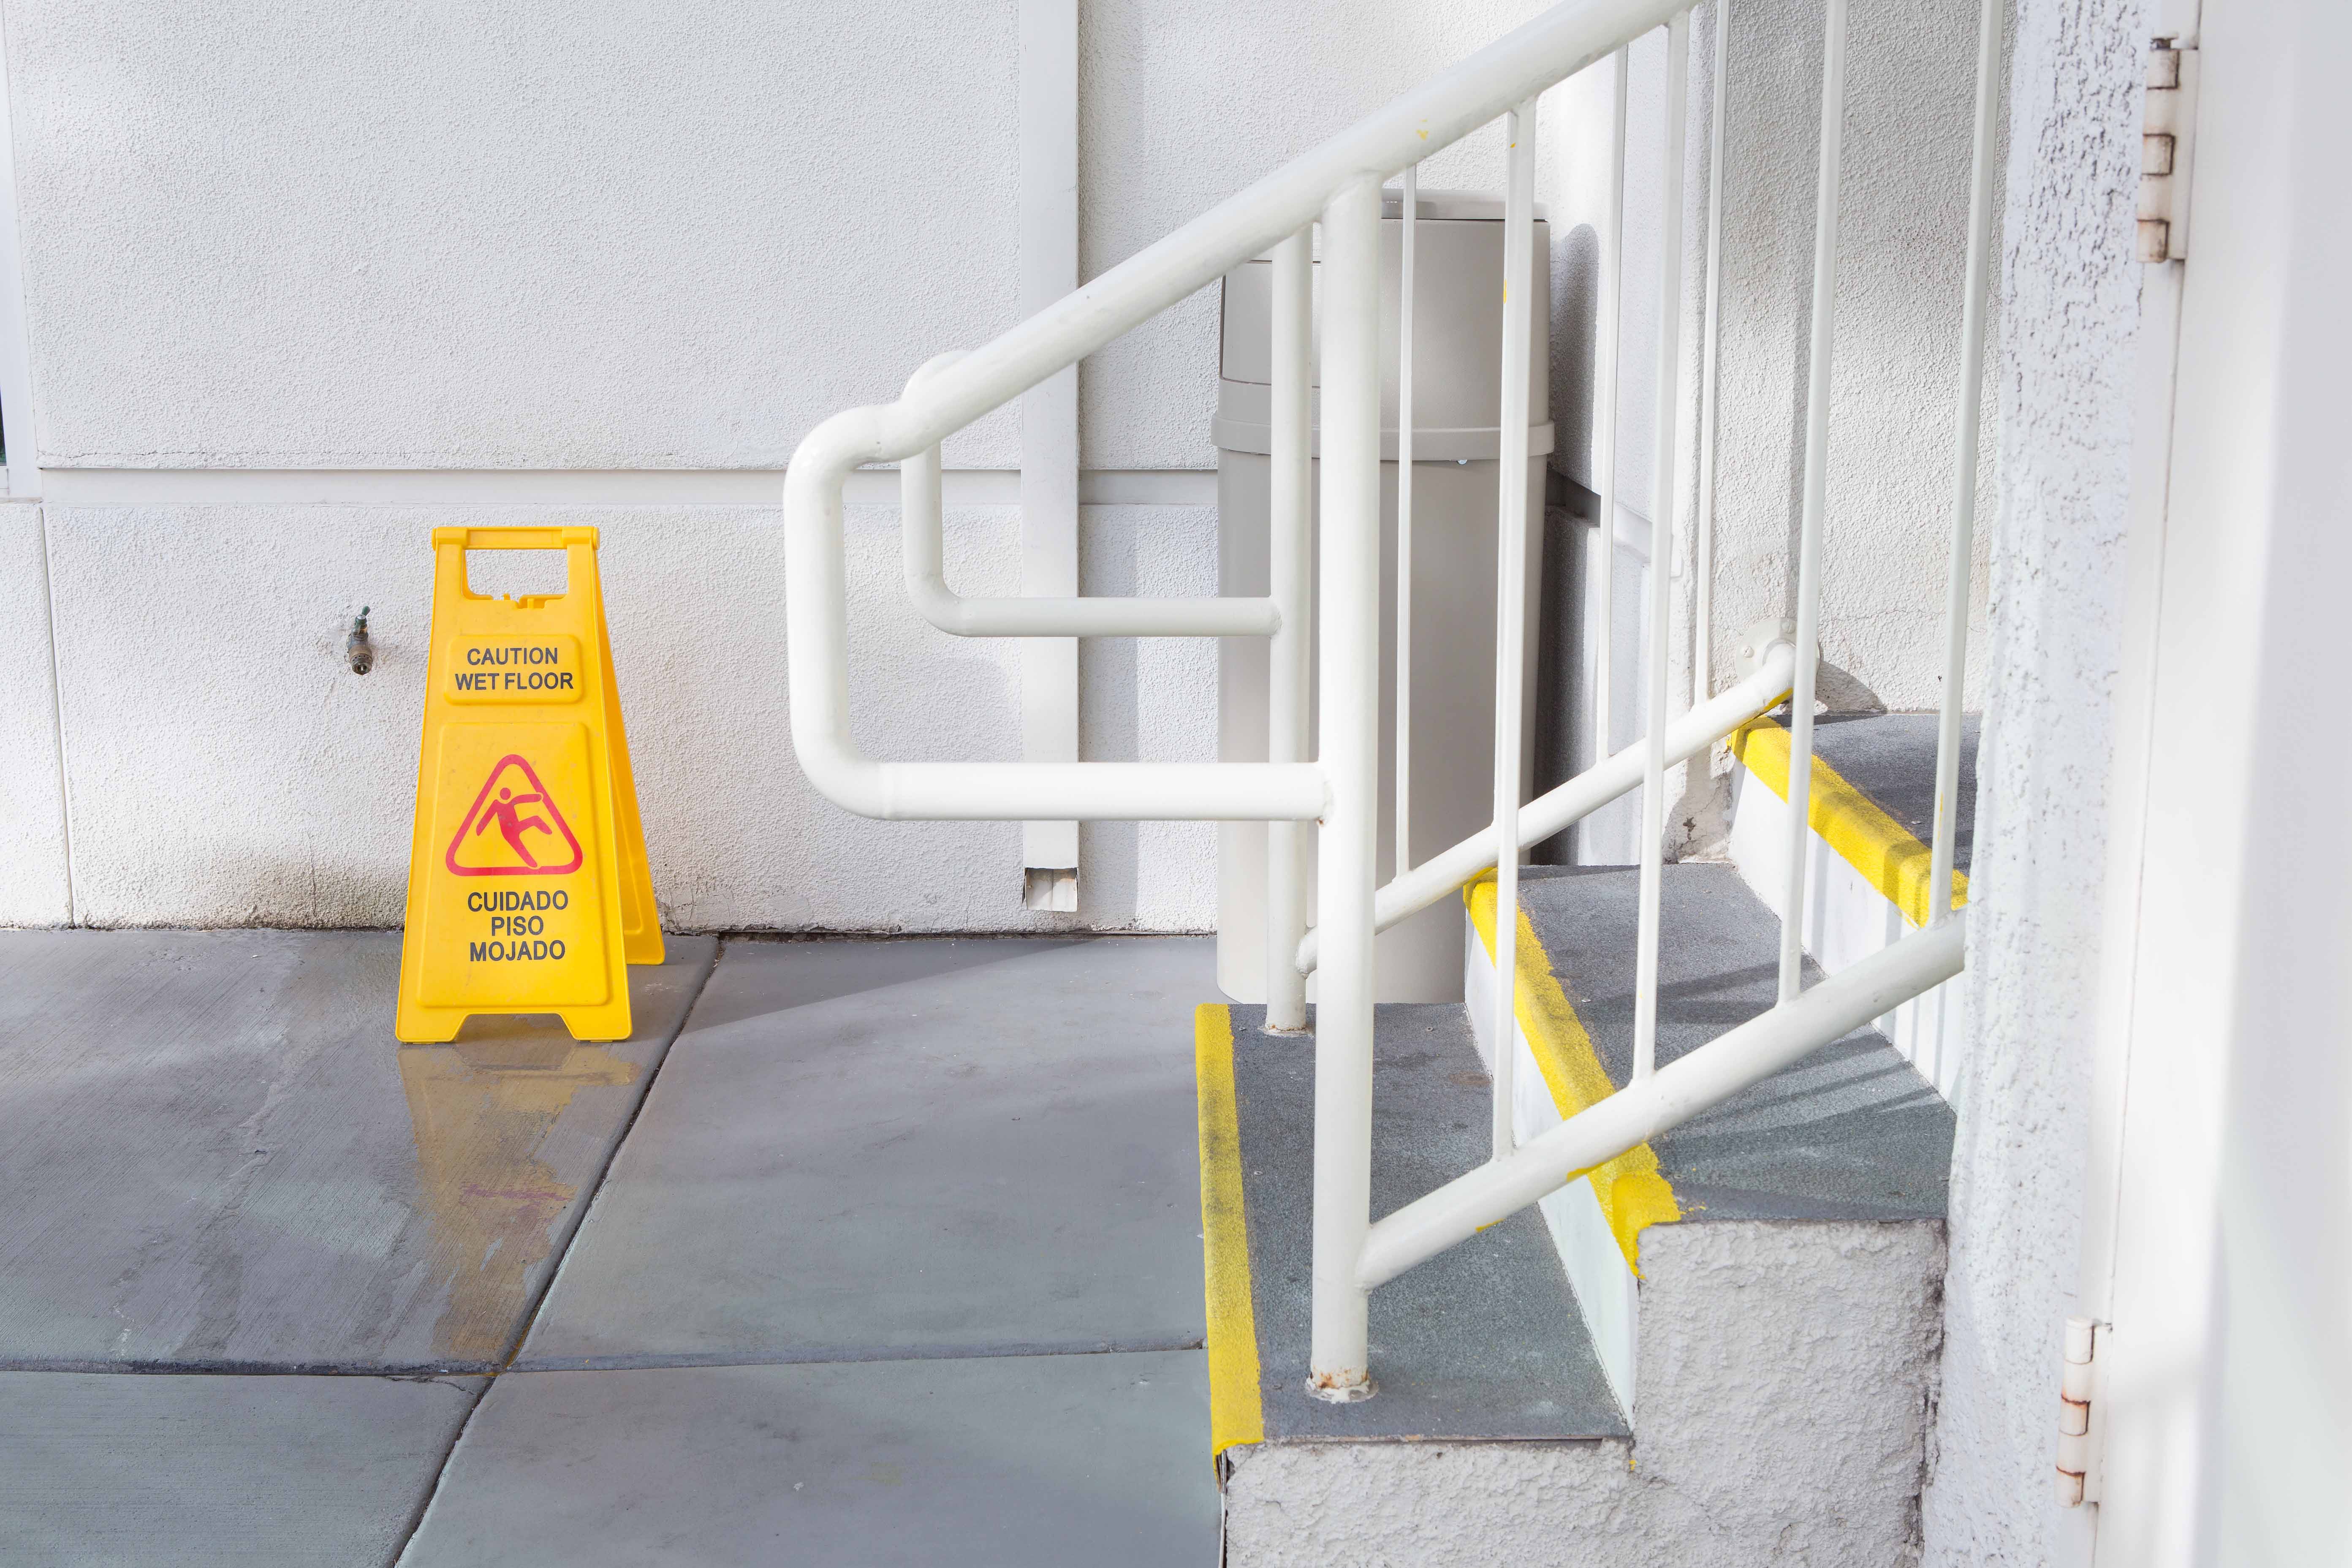 Wet floor sign near stairs